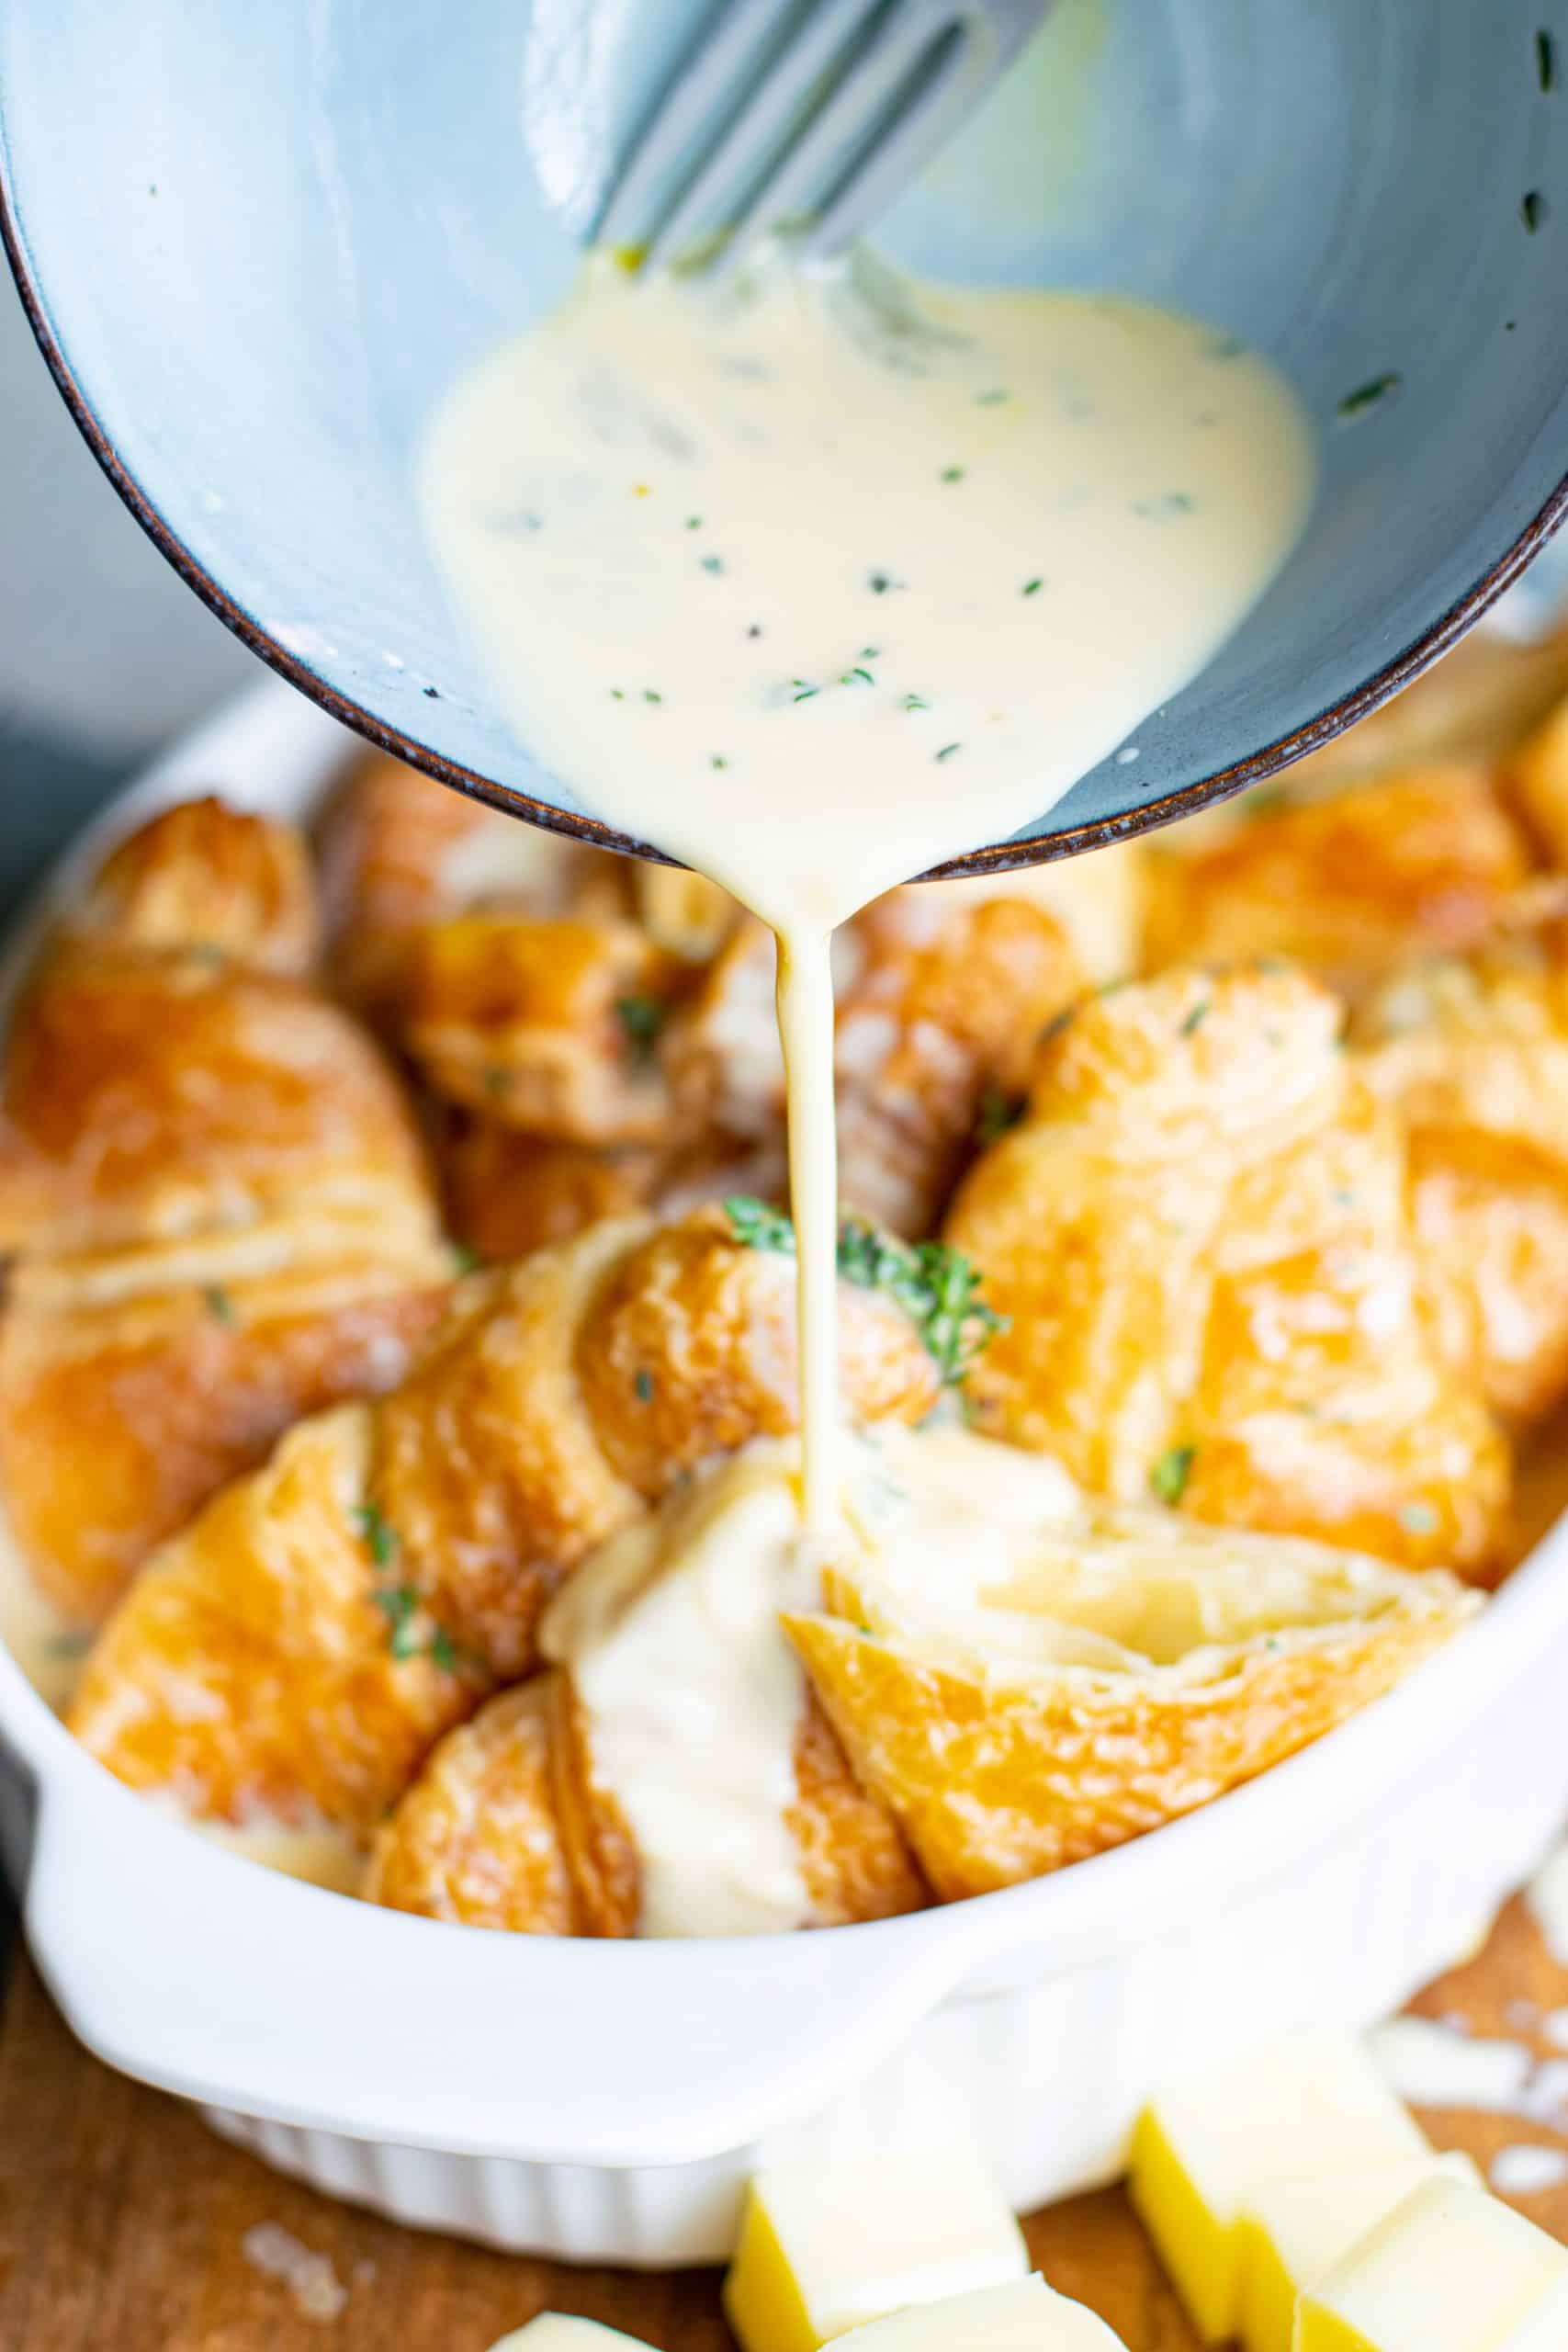 pour egg and cream mixture over croissants in a white oval baking dish.